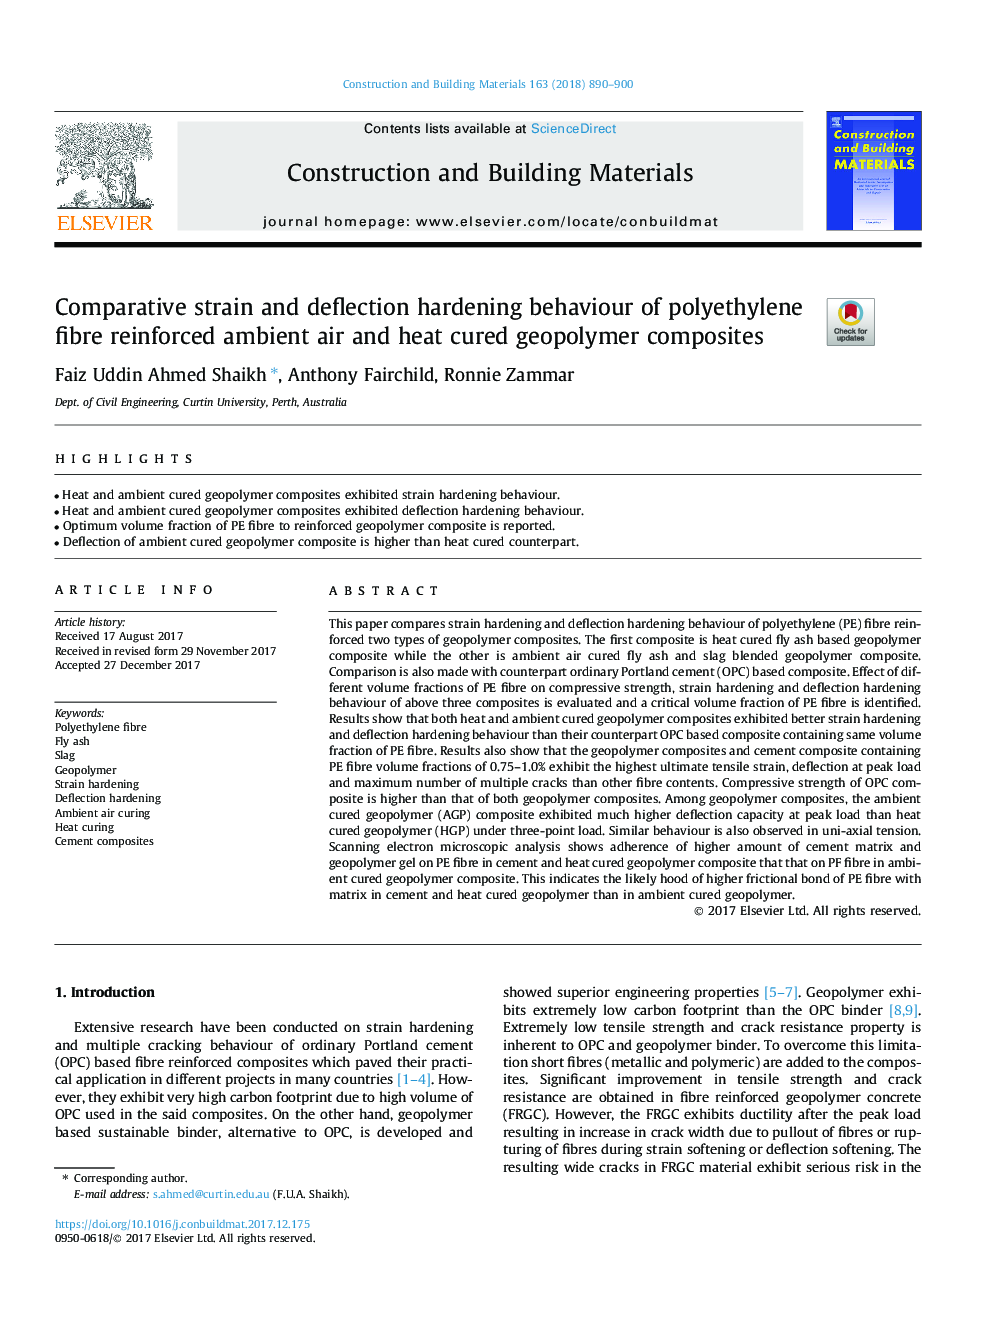 Comparative strain and deflection hardening behaviour of polyethylene fibre reinforced ambient air and heat cured geopolymer composites